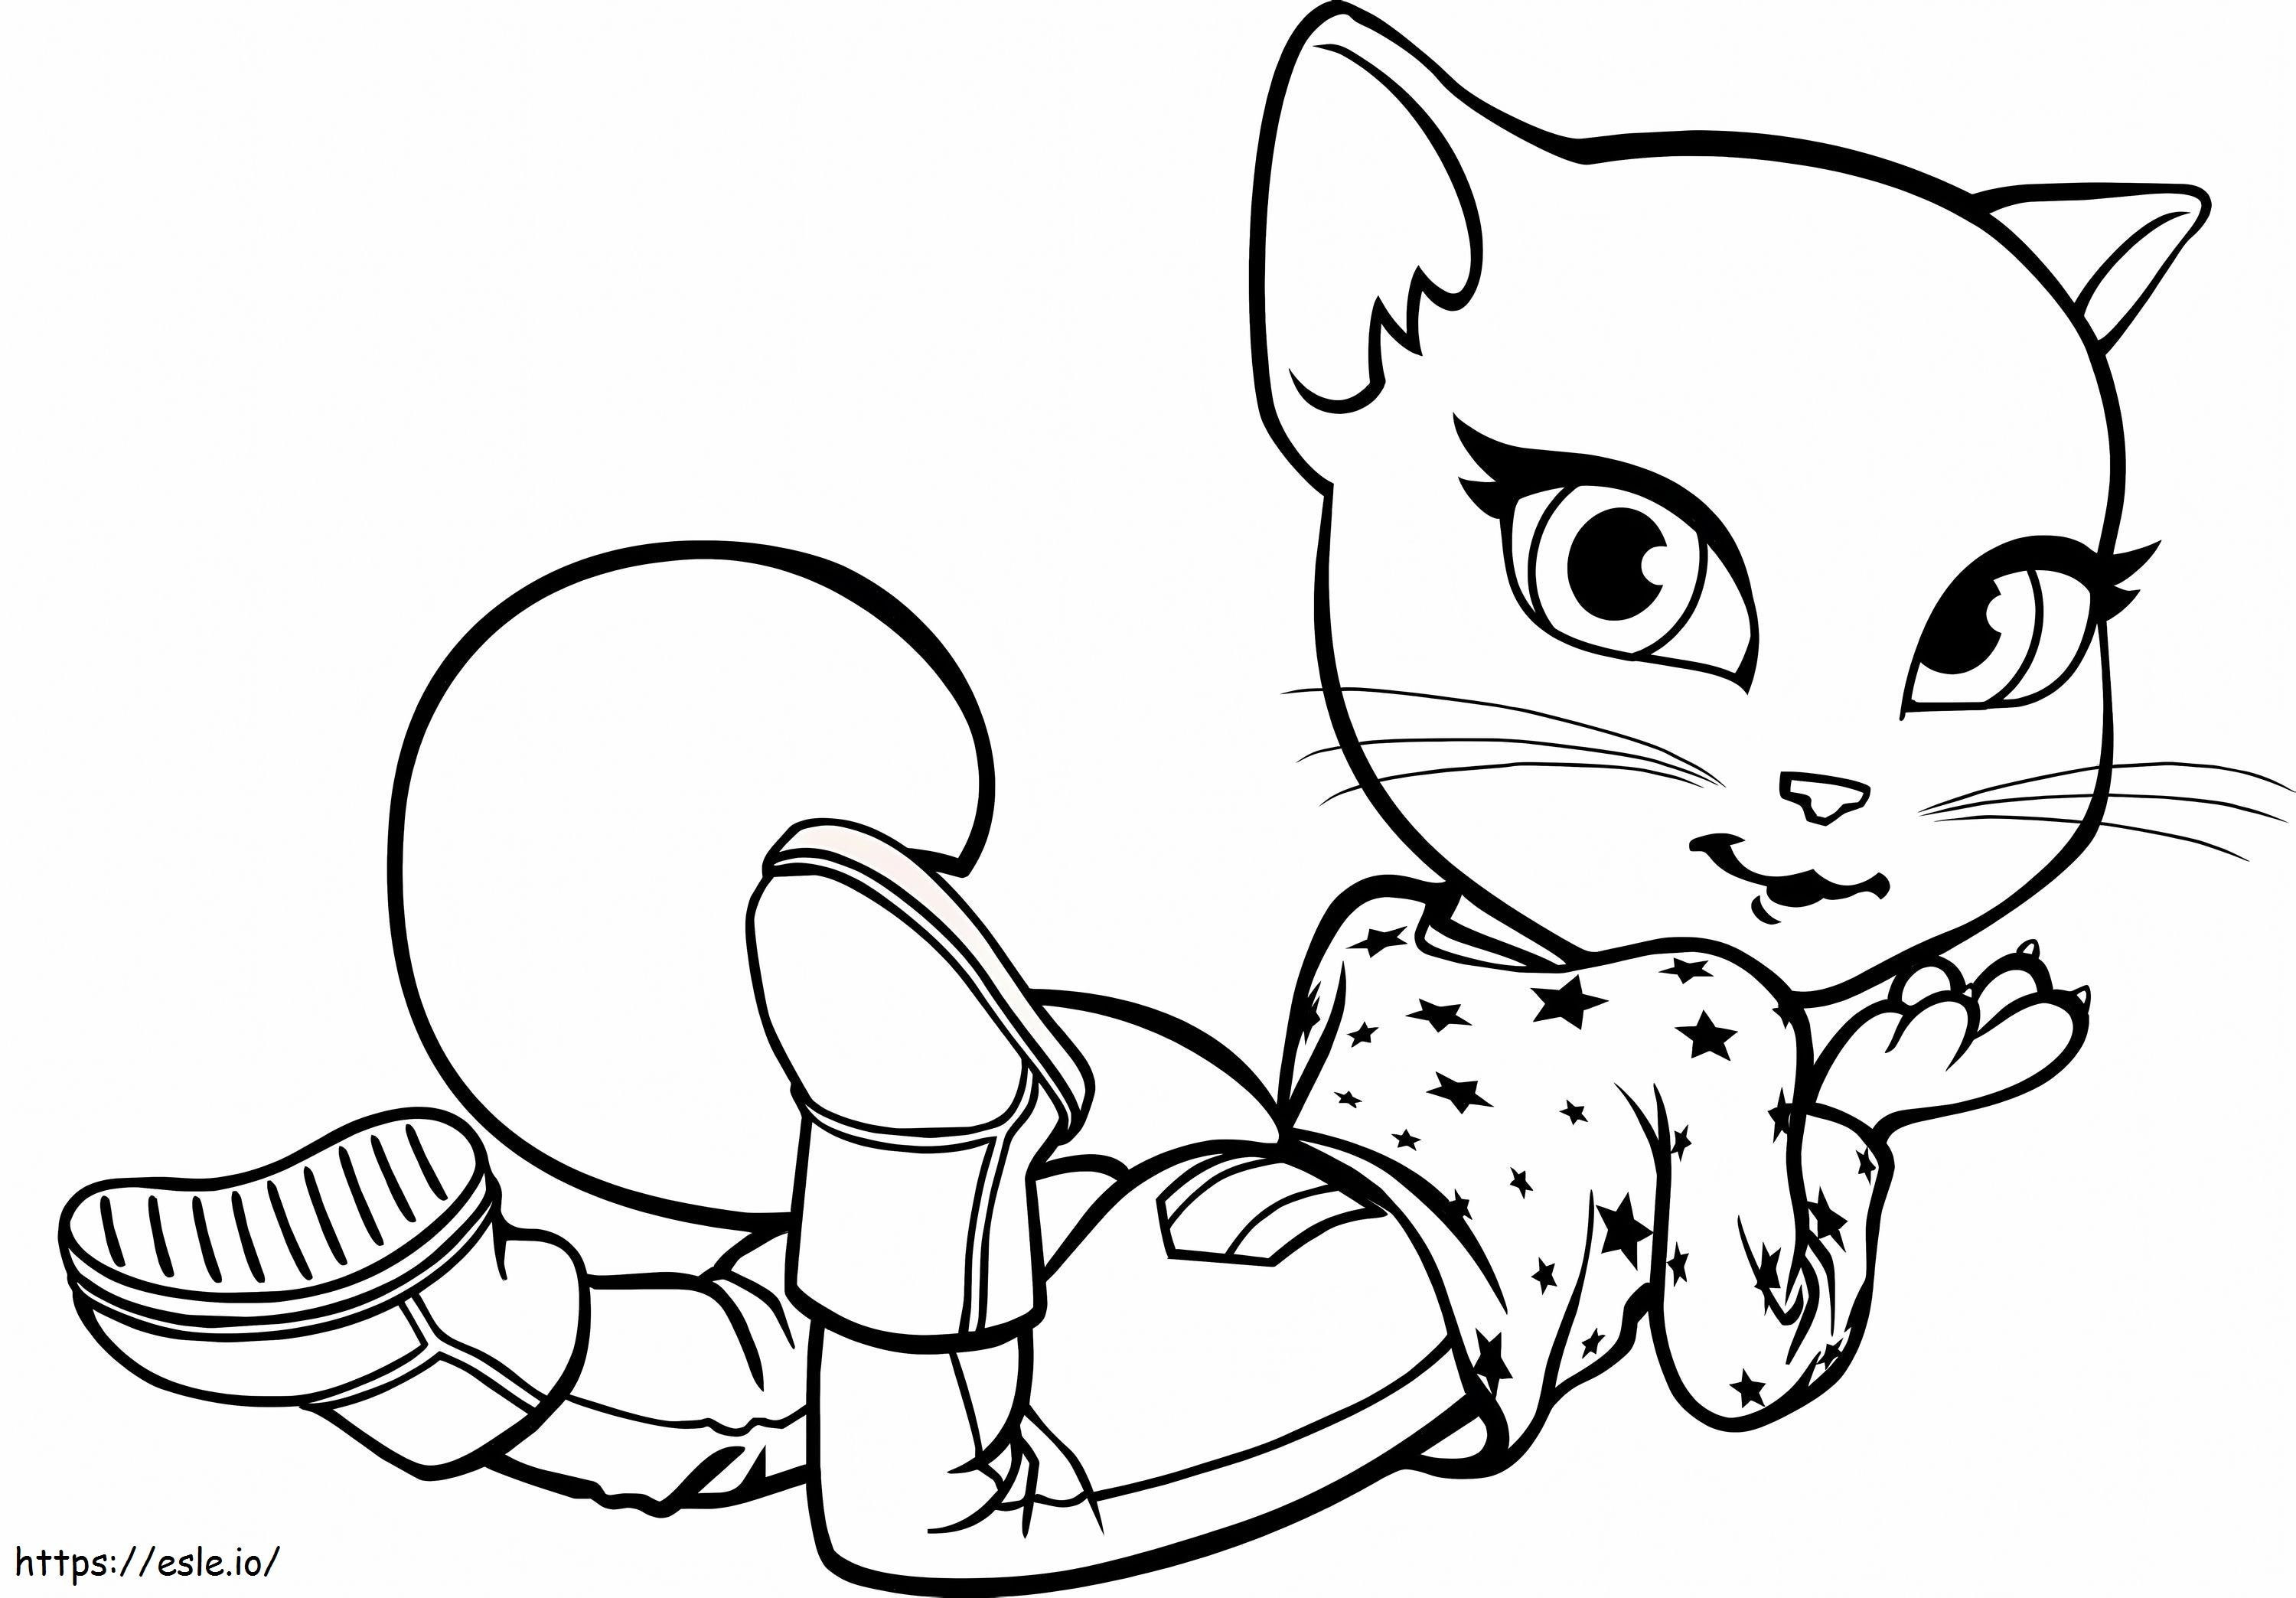 Cute Talking To Angela coloring page